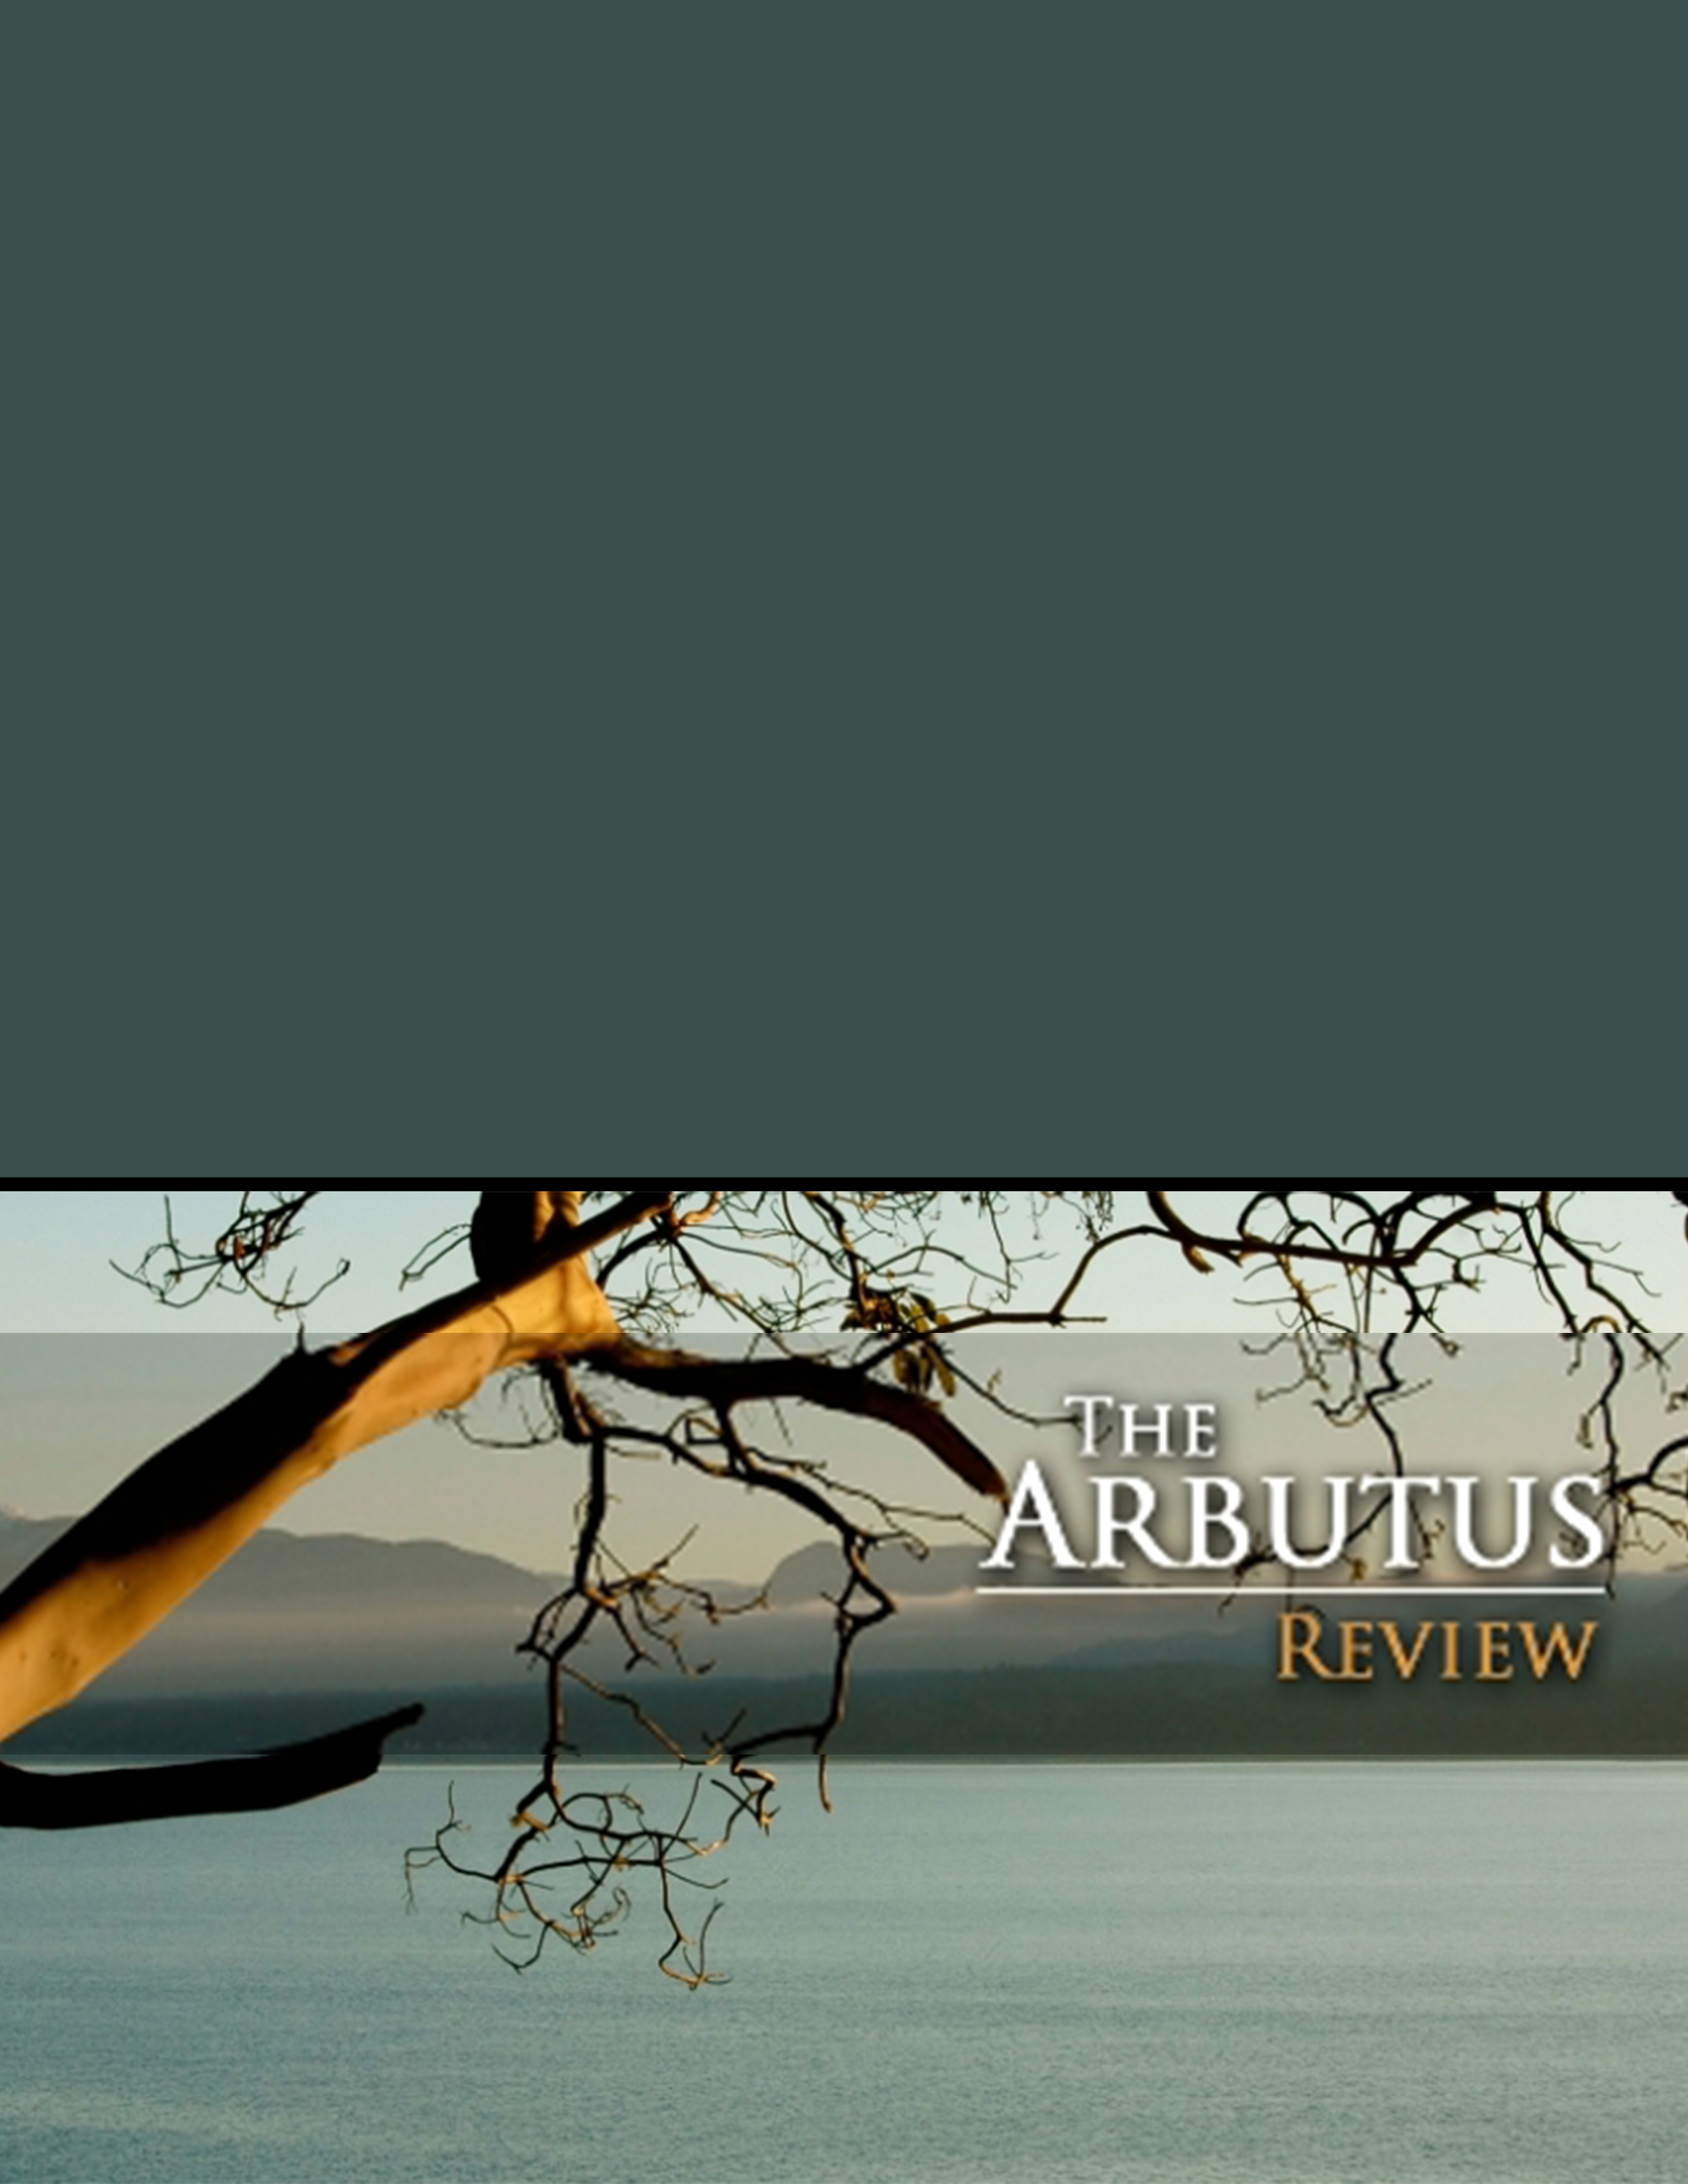 The Arbutus Review